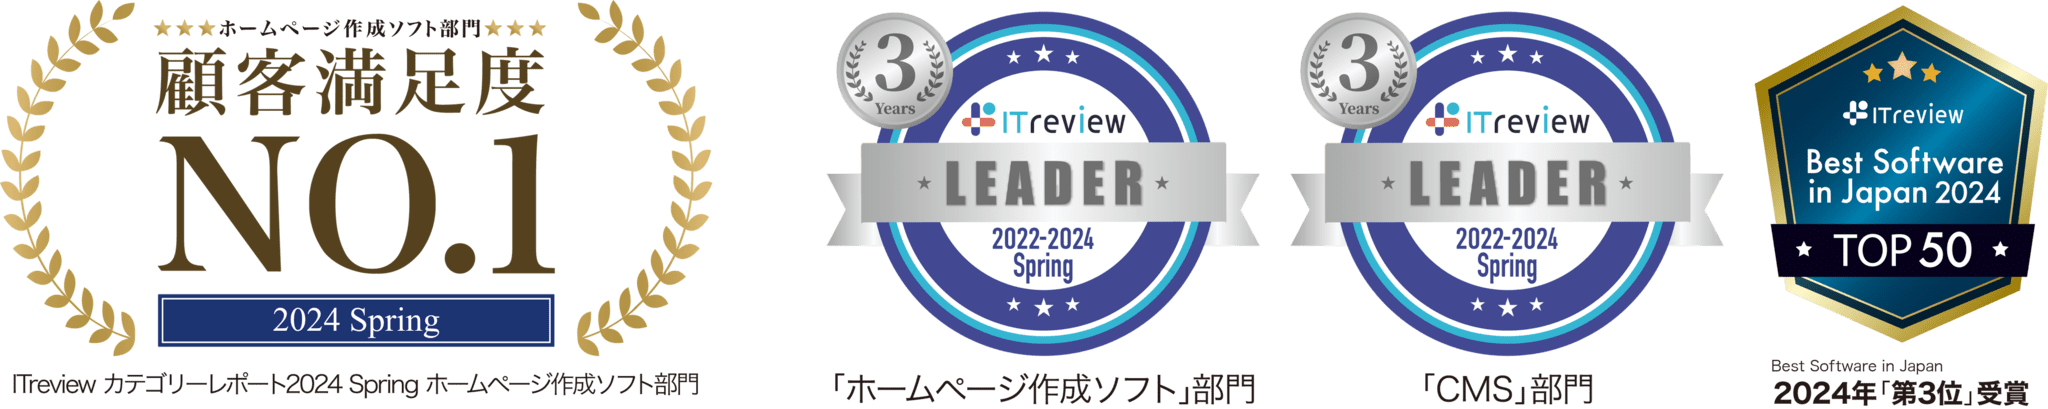 「ITreview」において、ホームページ制作部門で顧客満足度NO.1や、「ITreview Best Software in Japan」のTOP50に選定されています。